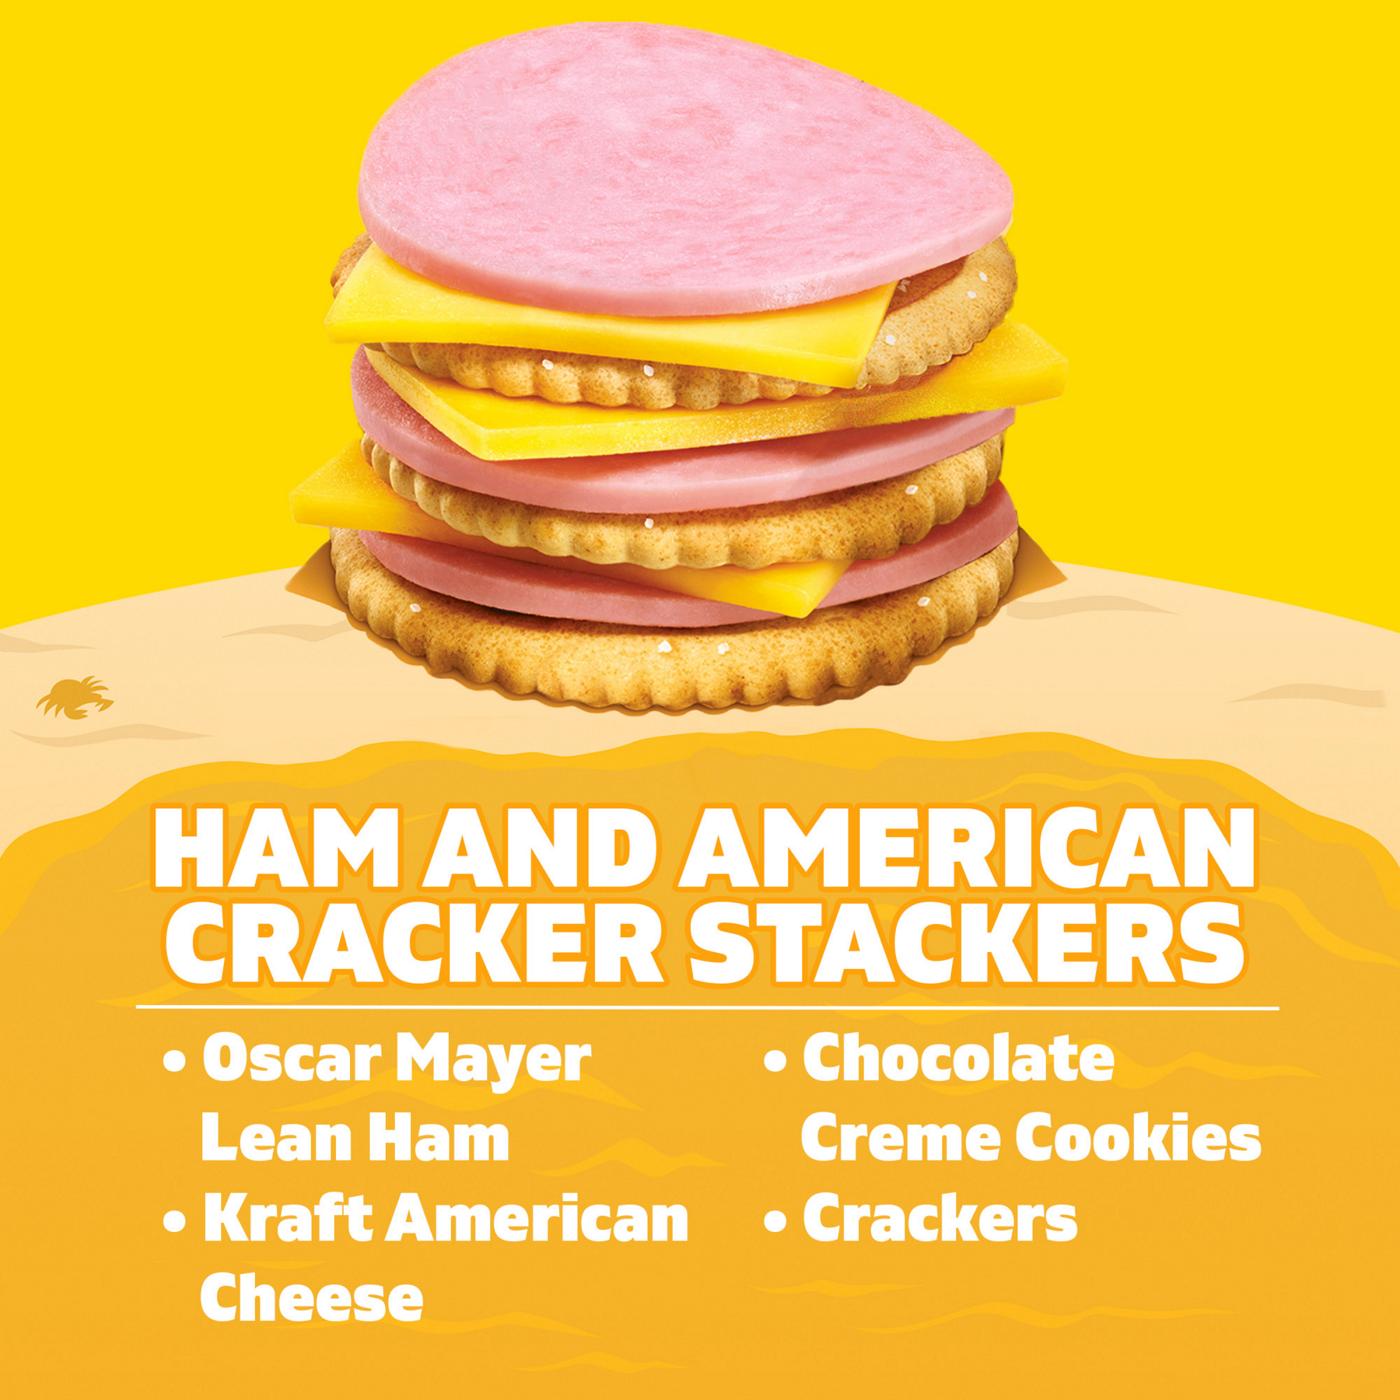 Lunchables Snack Kit Tray - Ham & American Cracker Stackers with Chocolate Creme Cookies; image 6 of 6